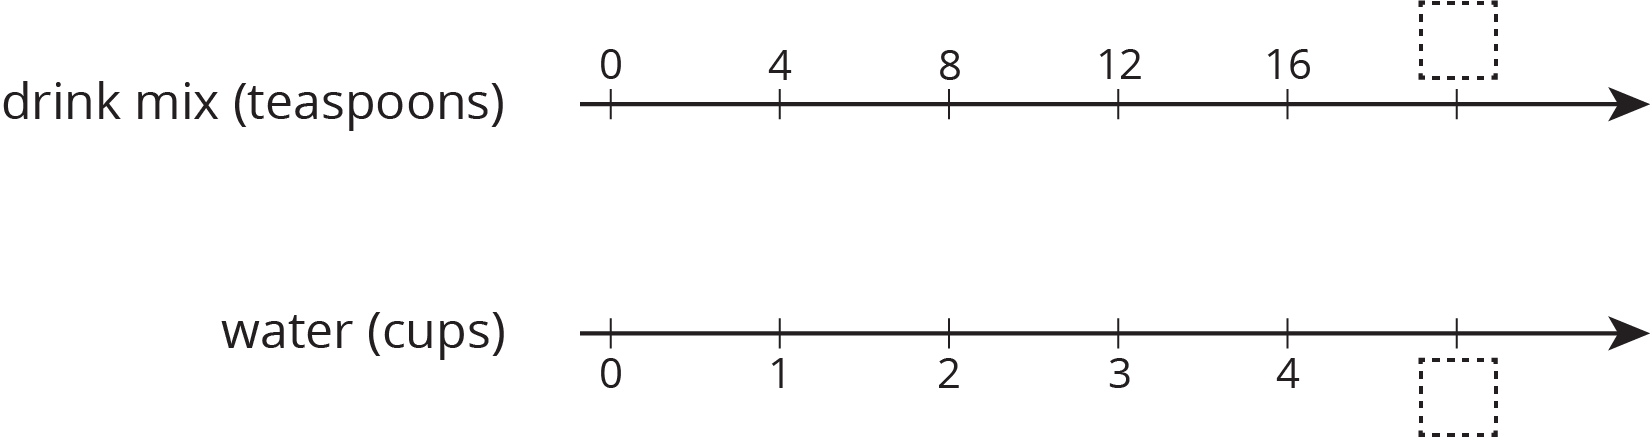 A double number line with 6 evenly spaced tick marks. The top number line is labeled "Salt, in teaspoons" and the numbers 0, 4, 8, 12, and 16 are indicated. The last tick mark is blank. The bottom number line is labeled "Water, in cups" and the numbers 0, 1, 2, 3, 4 are indicated. The last tick mark is blank.